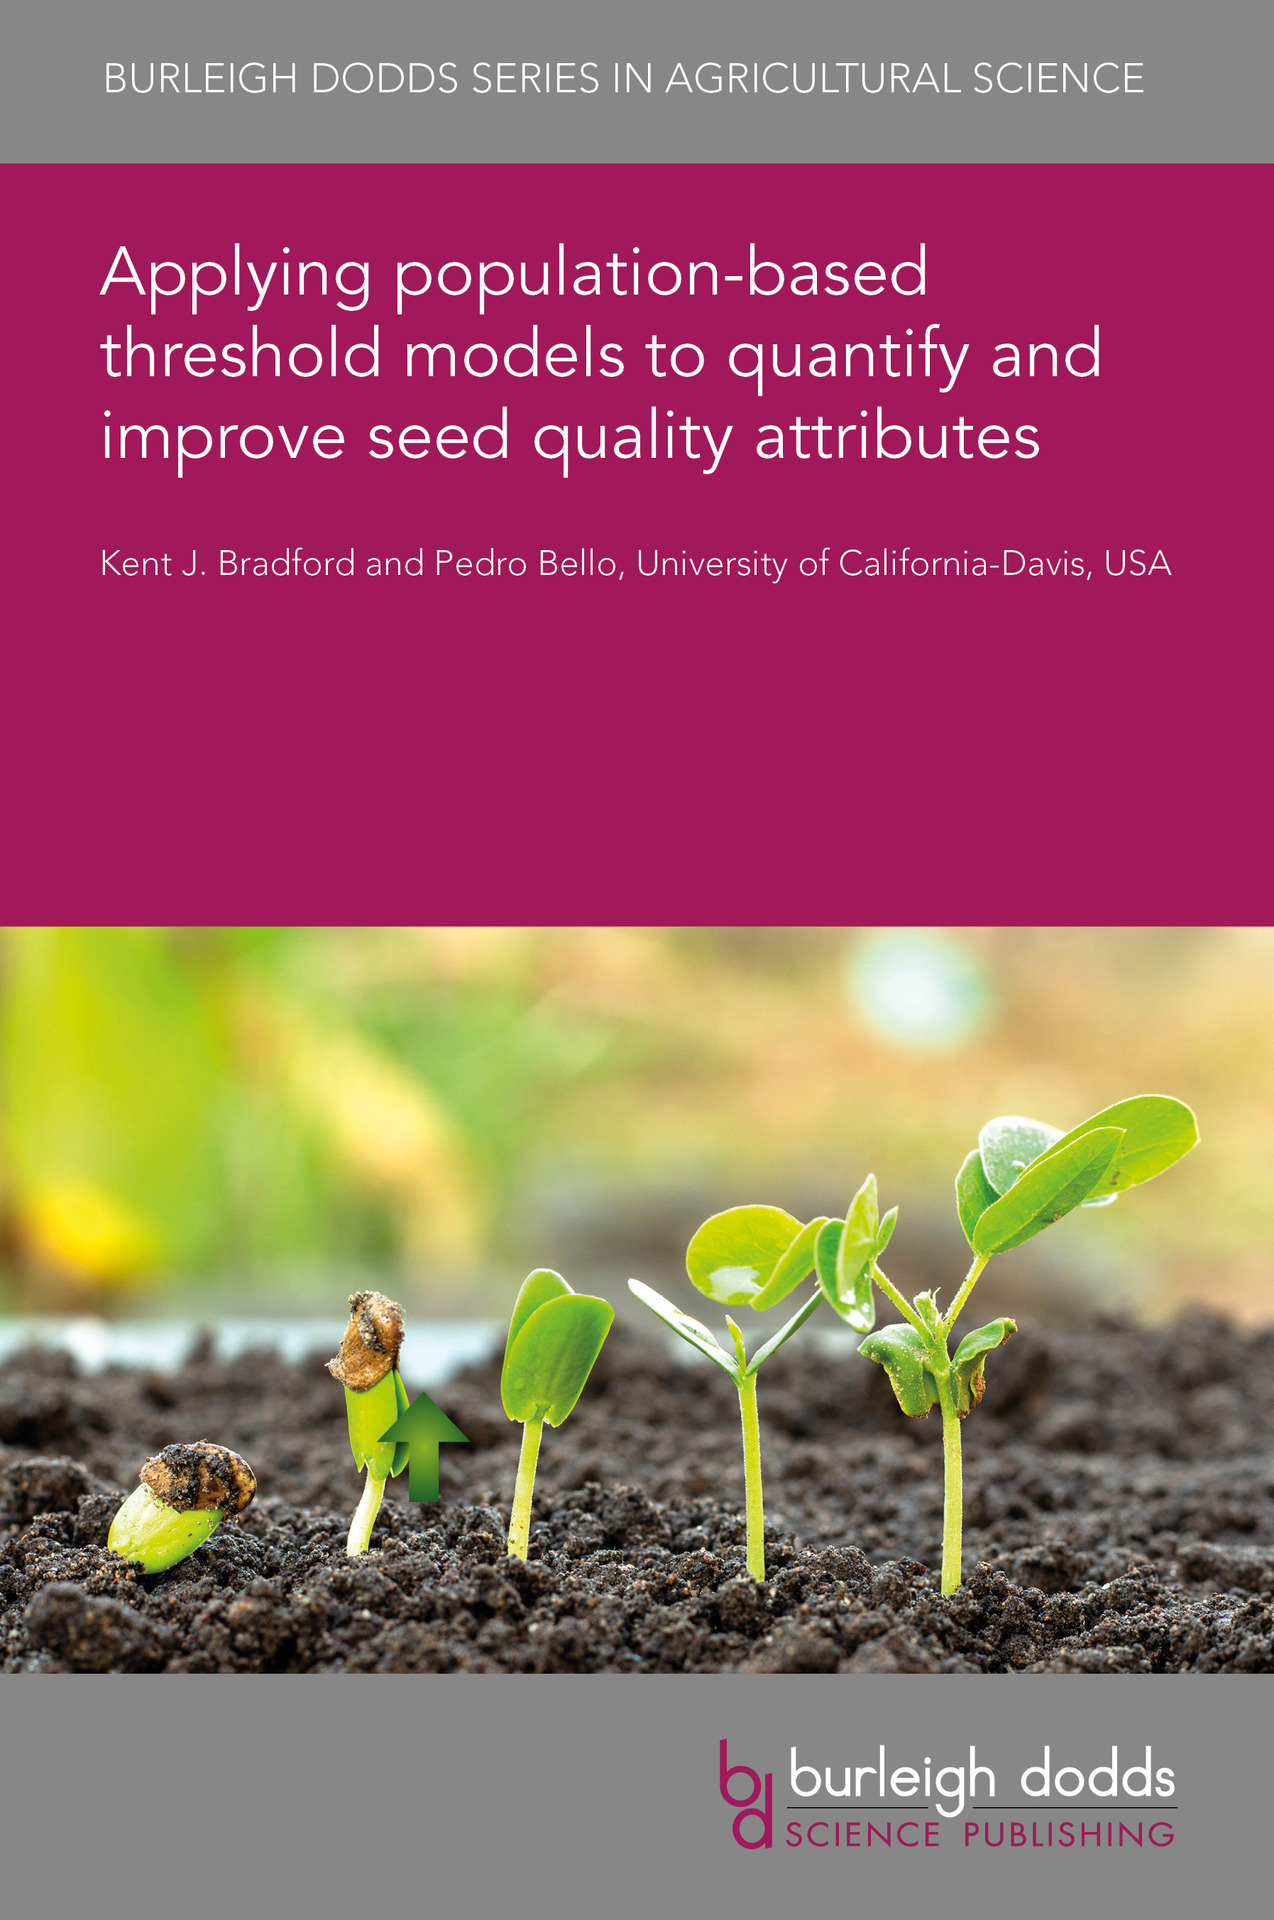 Applying population-based threshold models to qualify and improve seed quality attributes